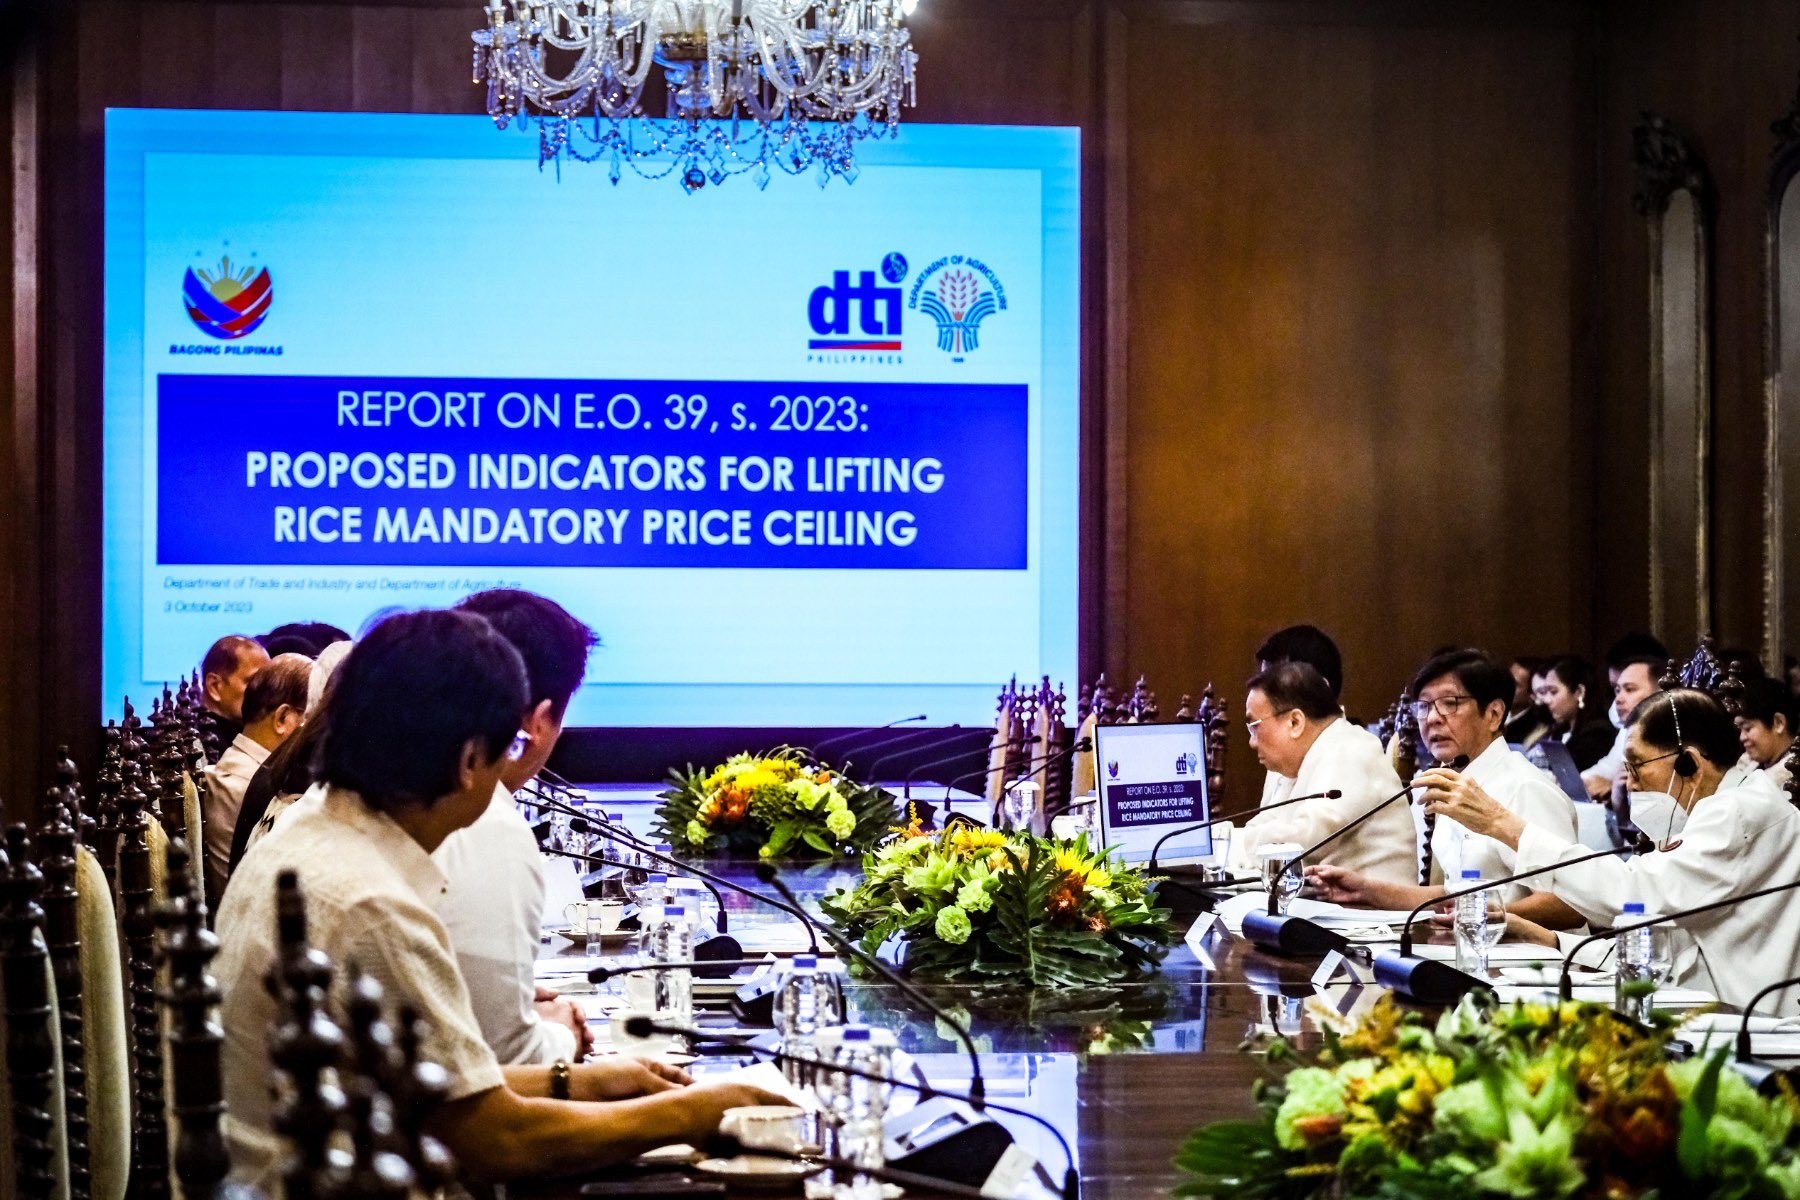 All signs point to lifting of rice price cap after Marcos’ meeting with DA, DTI